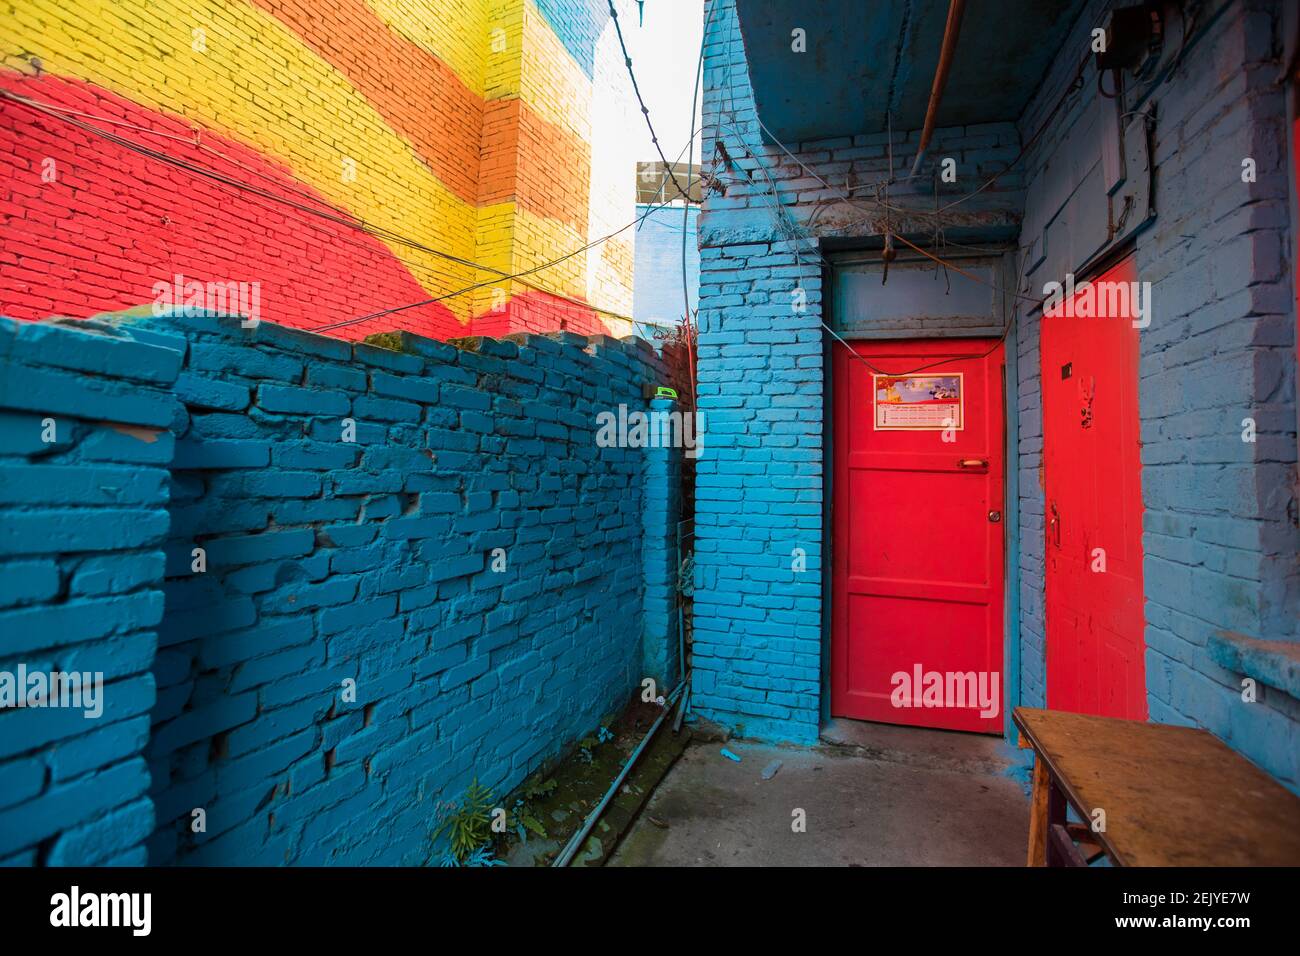 View of the colorful houses in Qicai Xiang, an old village with colorful houses in Mafang Wan, Chongqing, 8 April 2020. (Photo by Sun Kaifang/ChinaImages/Sipa USA) Stock Photo